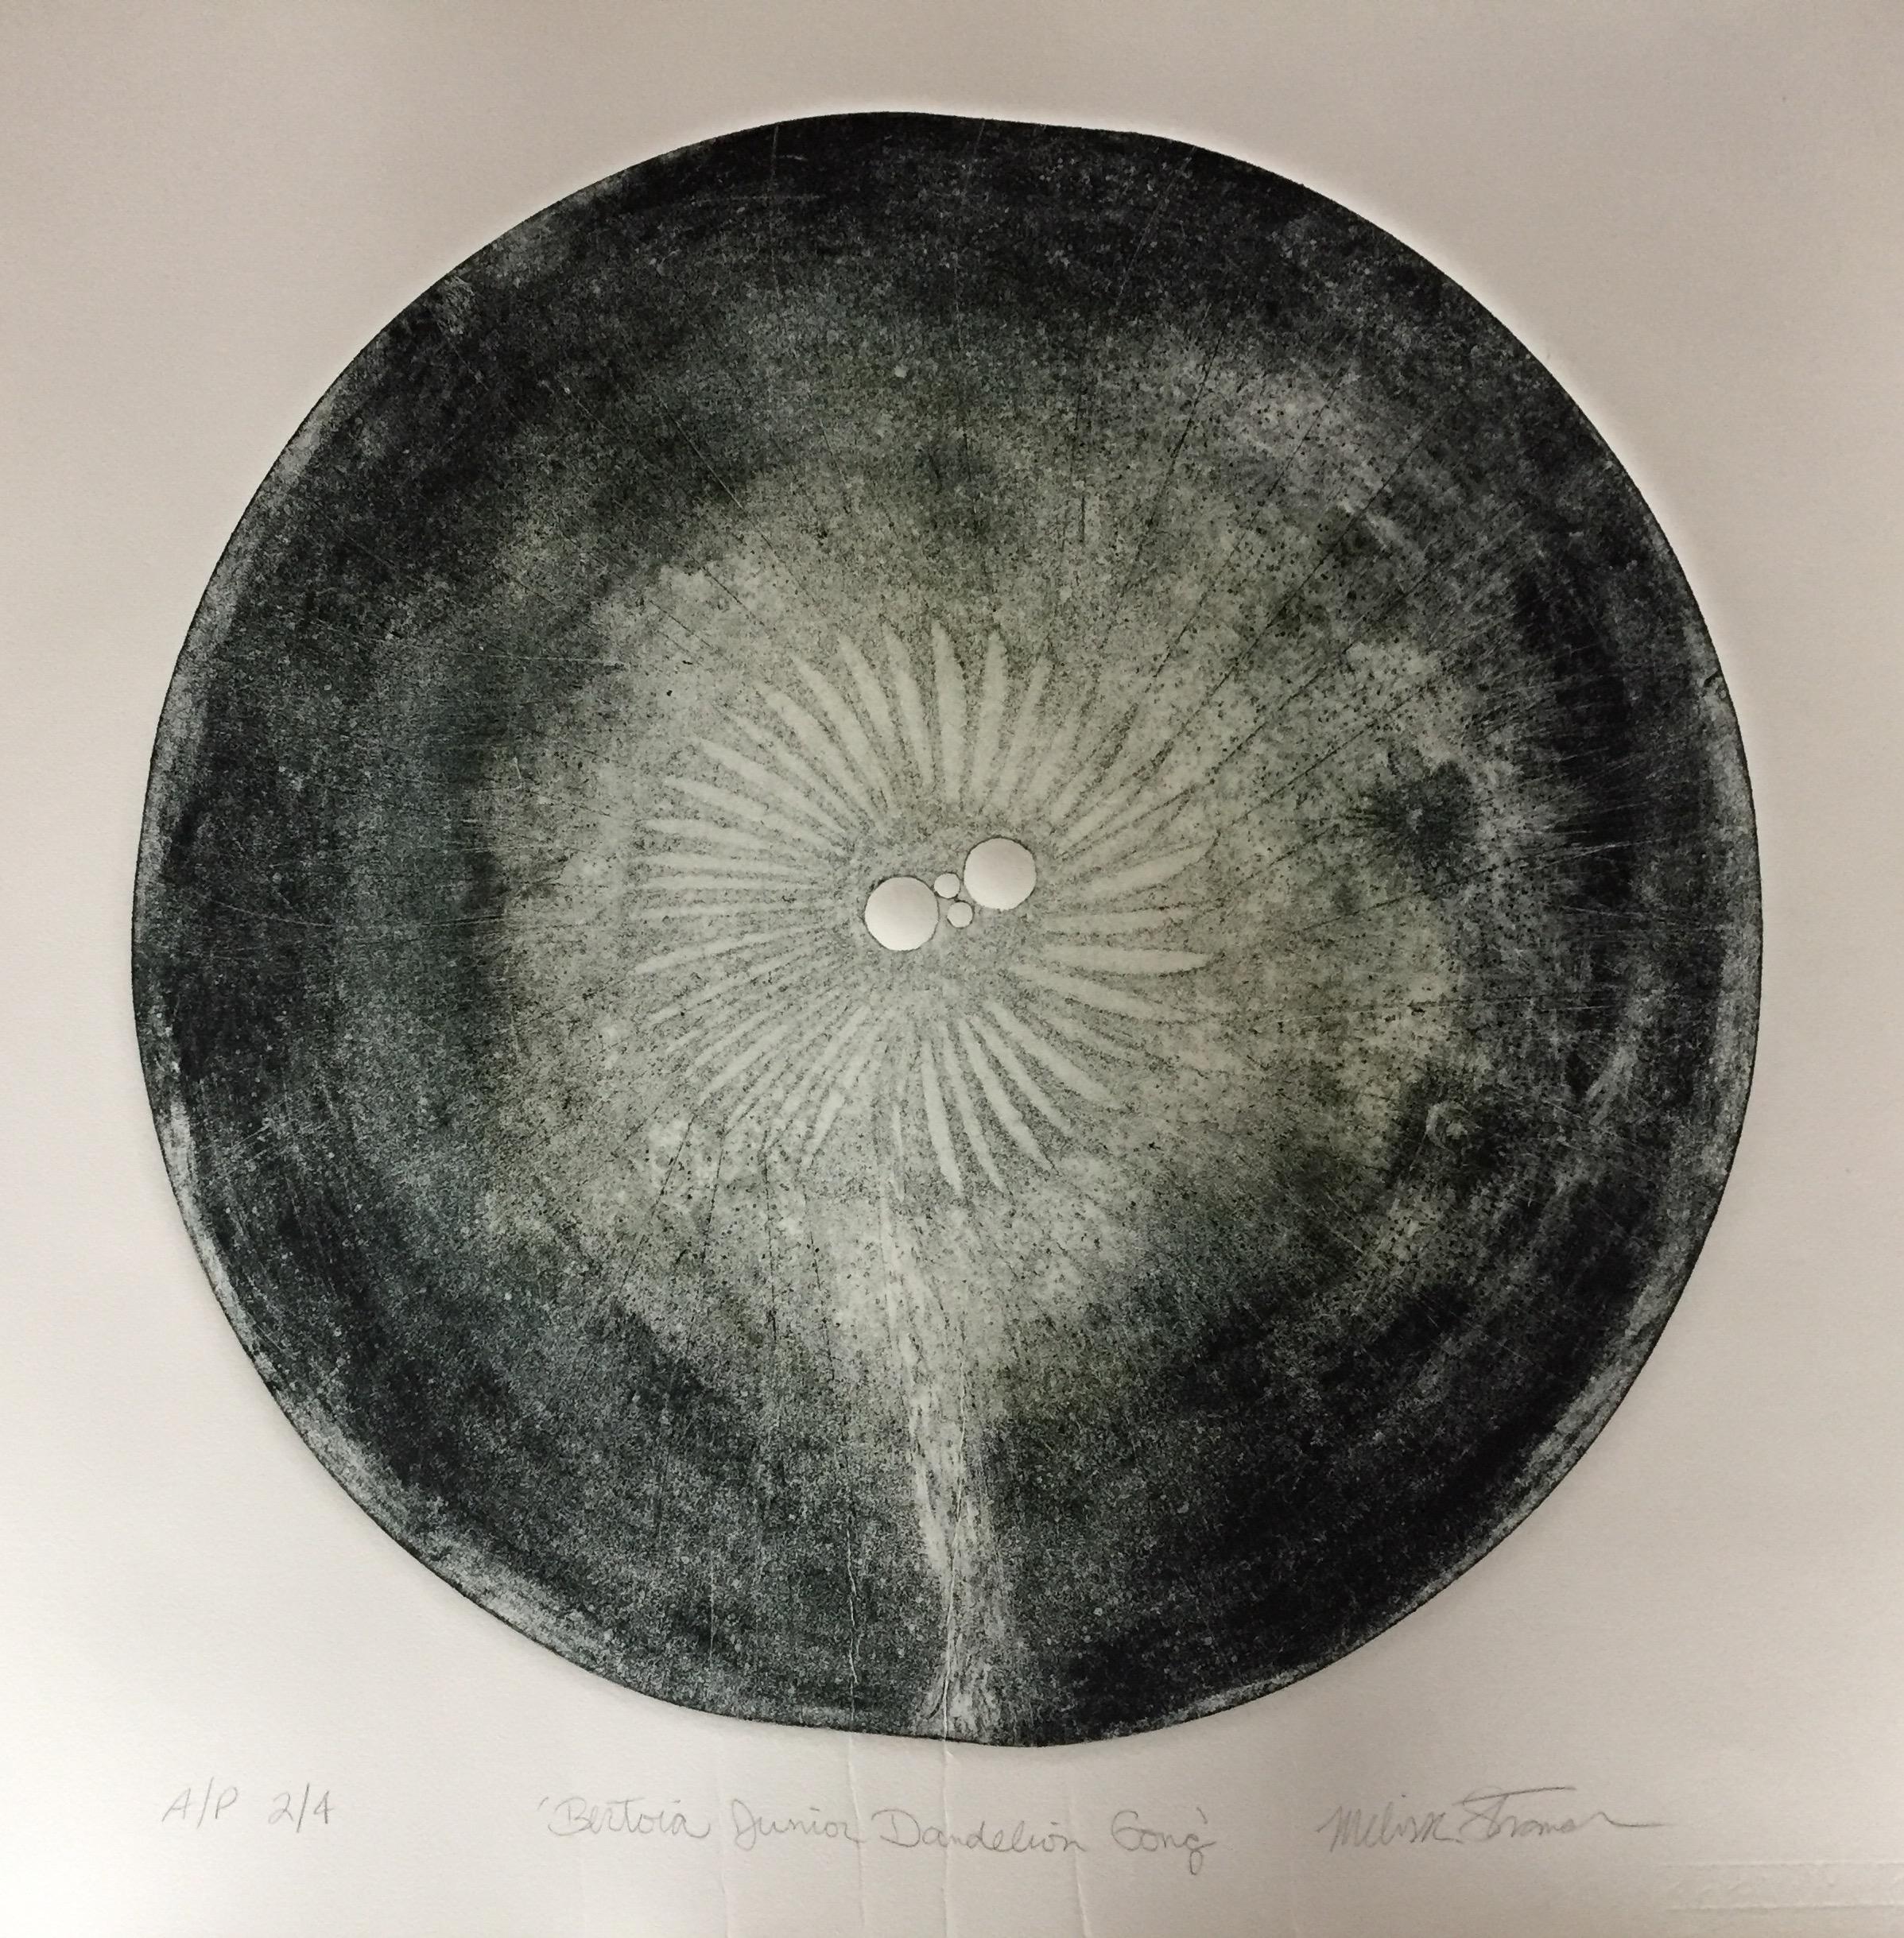 Contemporary artist Melissa Strawser’s Bertoia Junior Dandelion Gong Print is a pulled Artist Proof, an original intaglio print using aquatint printed onto Hahnemuhle paper with colored inks from a single bronze plate that just happens to be a